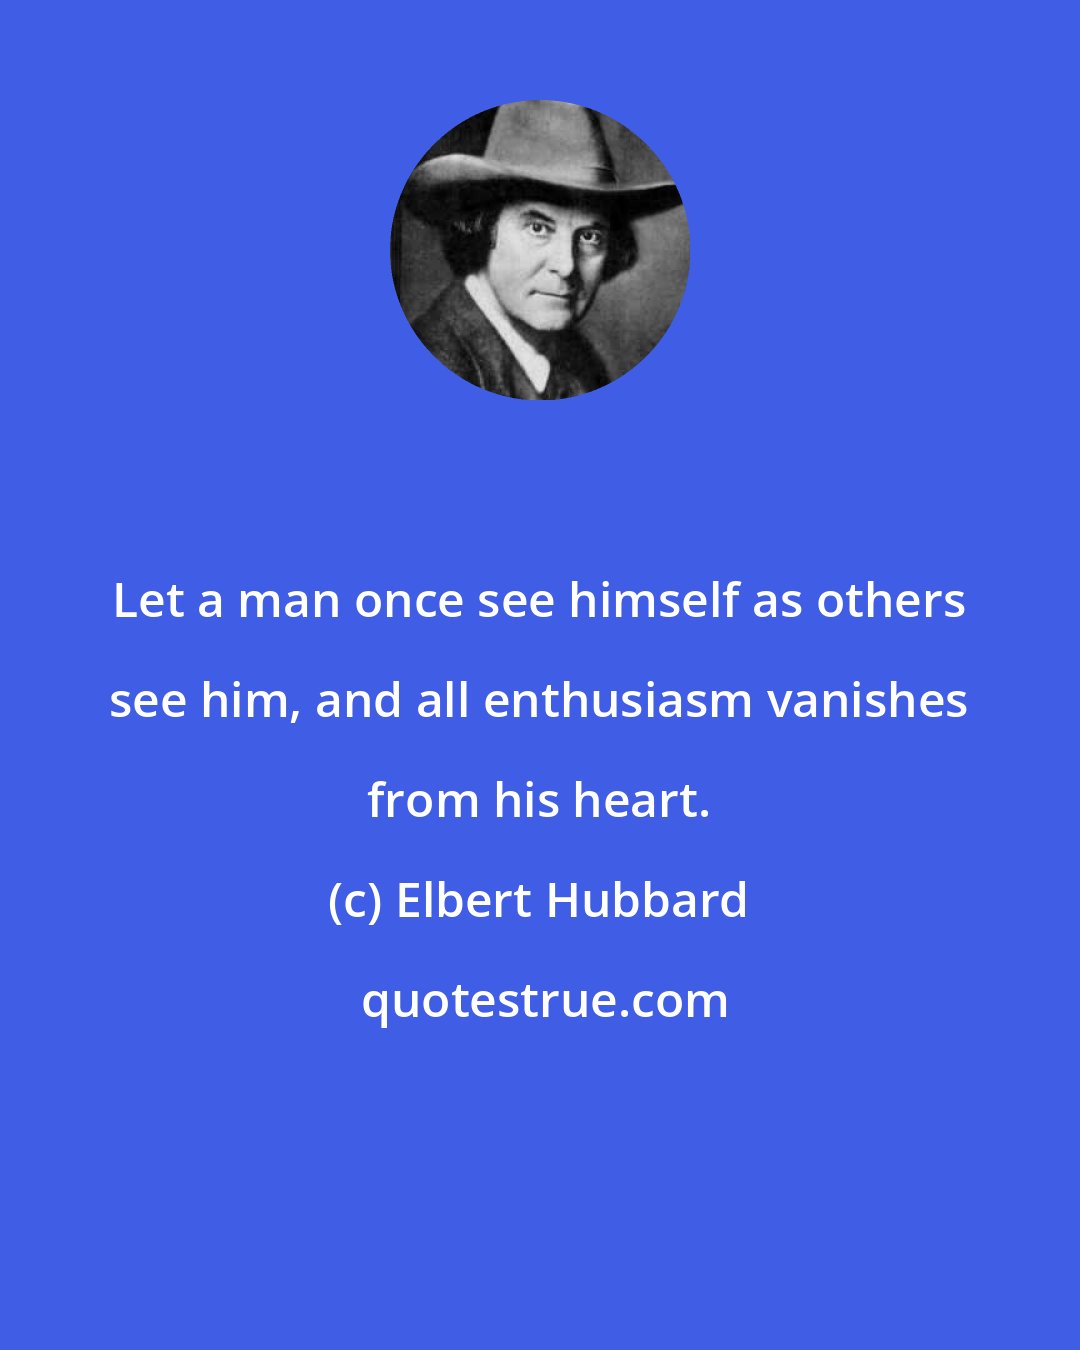 Elbert Hubbard: Let a man once see himself as others see him, and all enthusiasm vanishes from his heart.